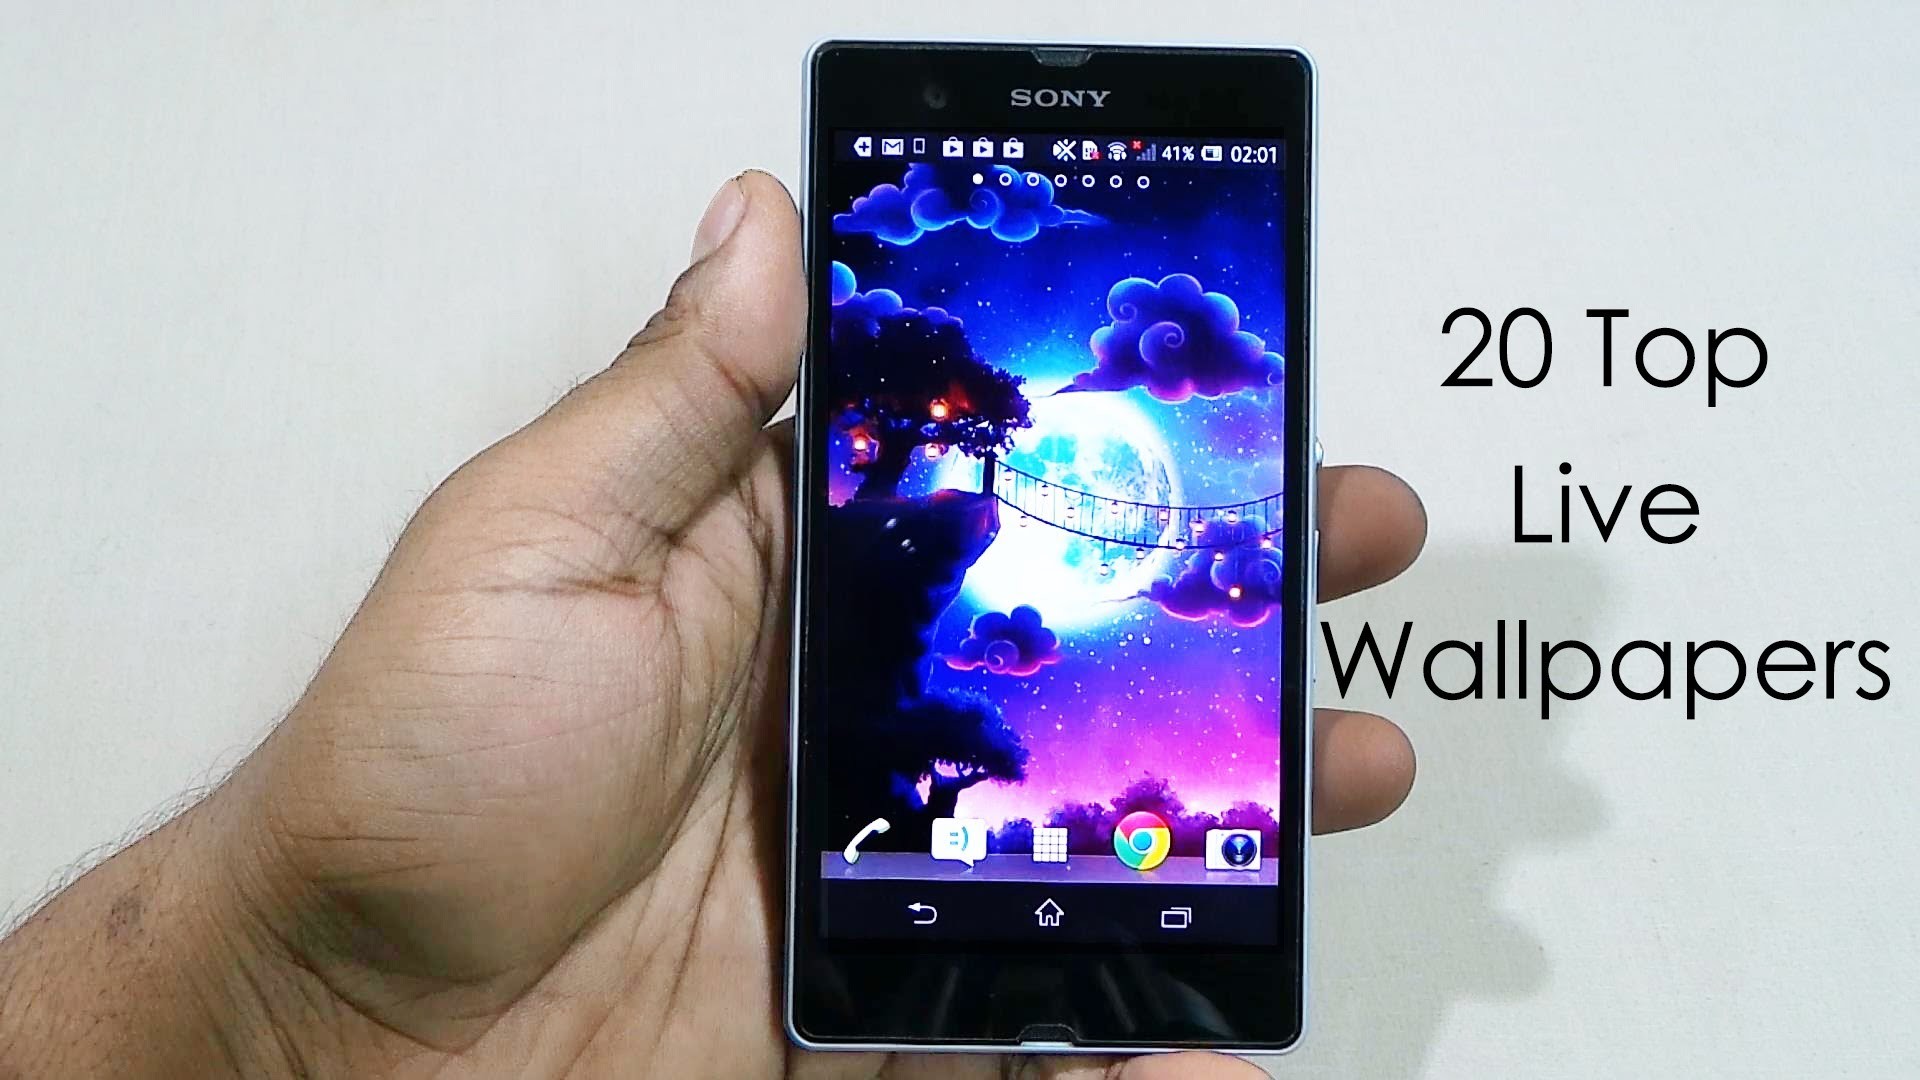 1920x1080 20 Best Live Wallpapers (Free) for Android (Xperia Z) - 2013 - Android Tips  #7 - Cursed4Eva.com - YouTube